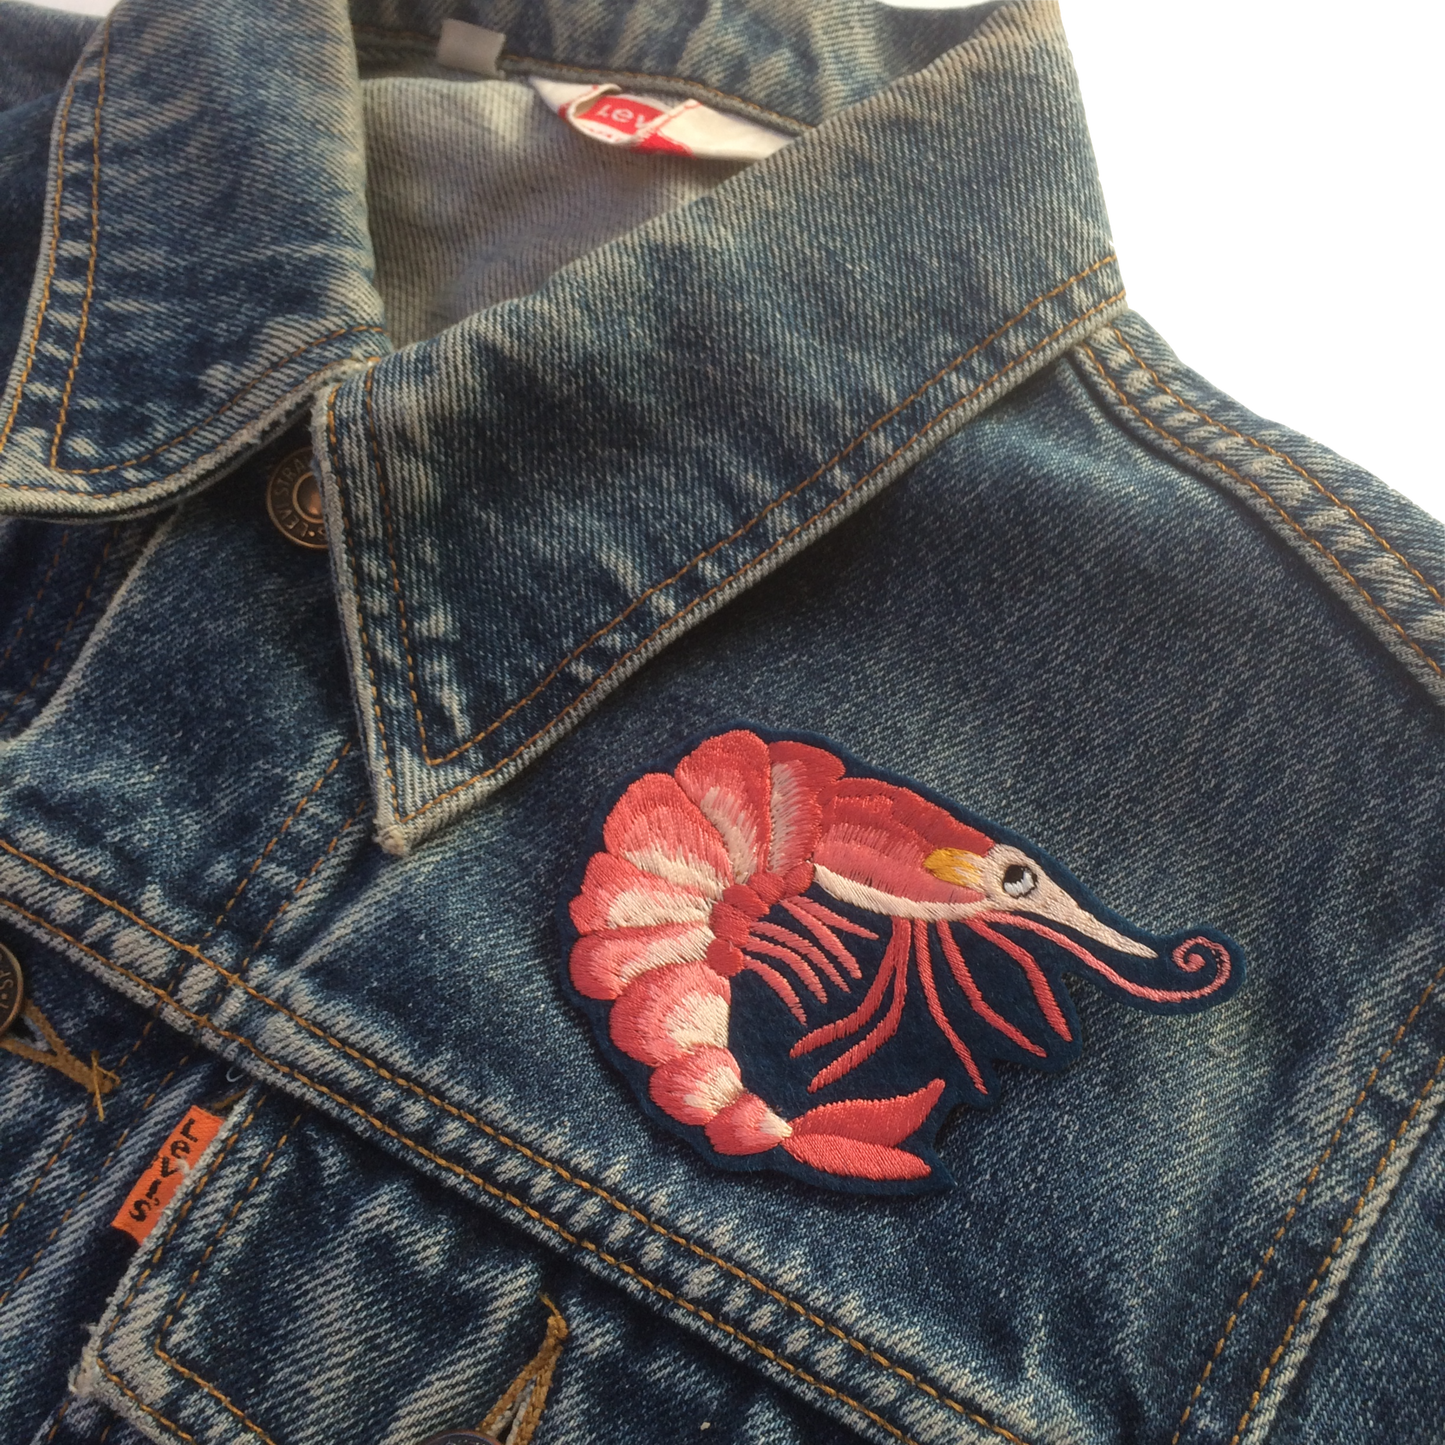 Prawn embroidered patch shown on the front shoulder of a denim jacket